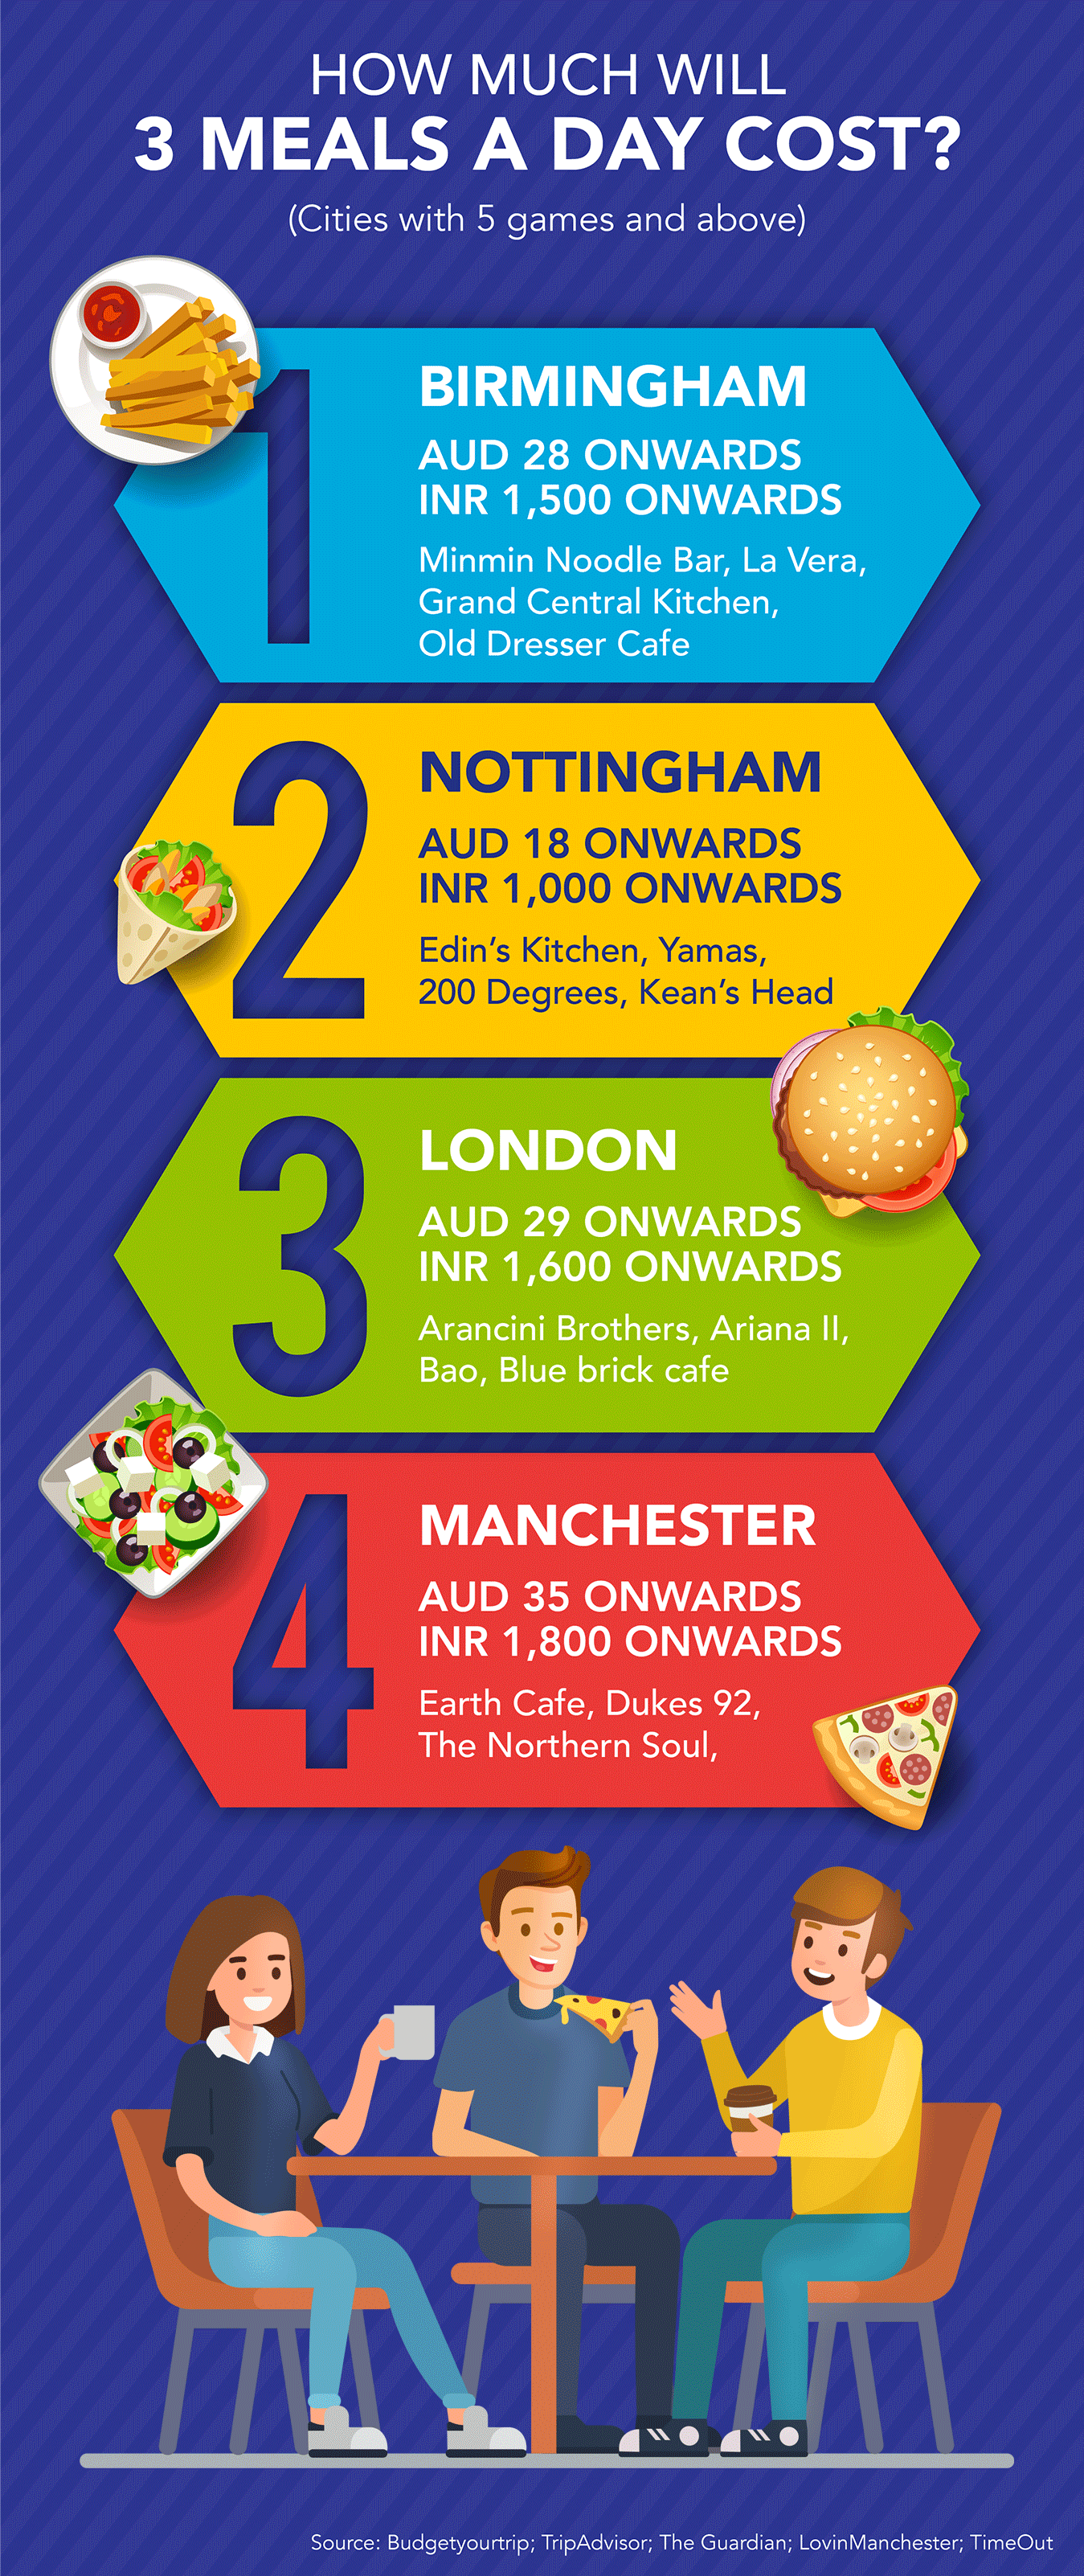 We’ve Planned Your Trip To The UK For The Cricket World Cup On A Student Budget